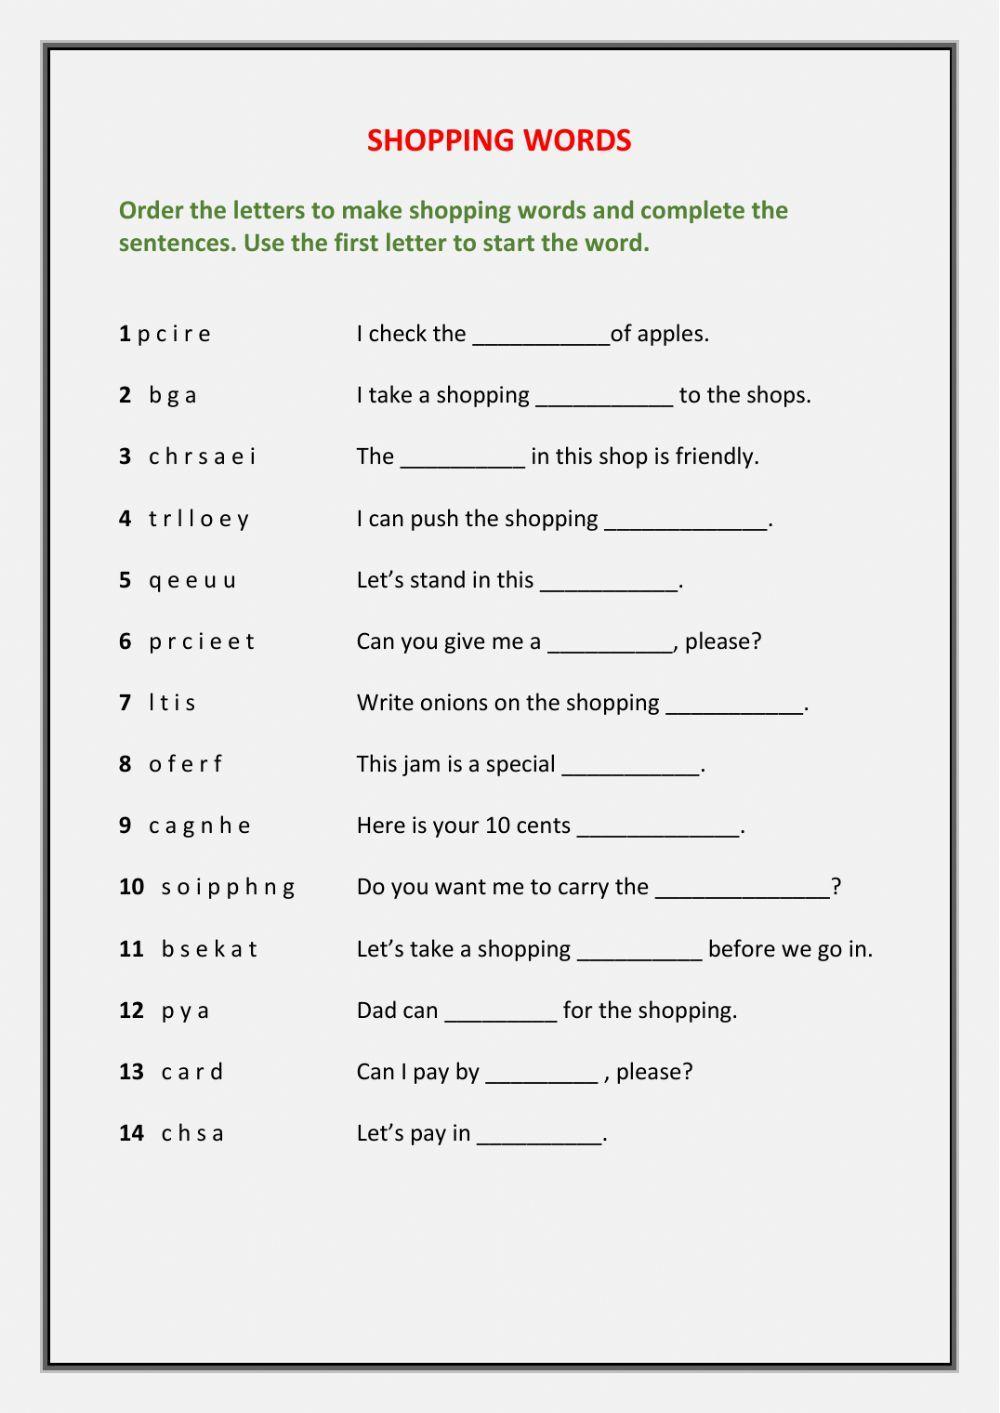 Shopping words